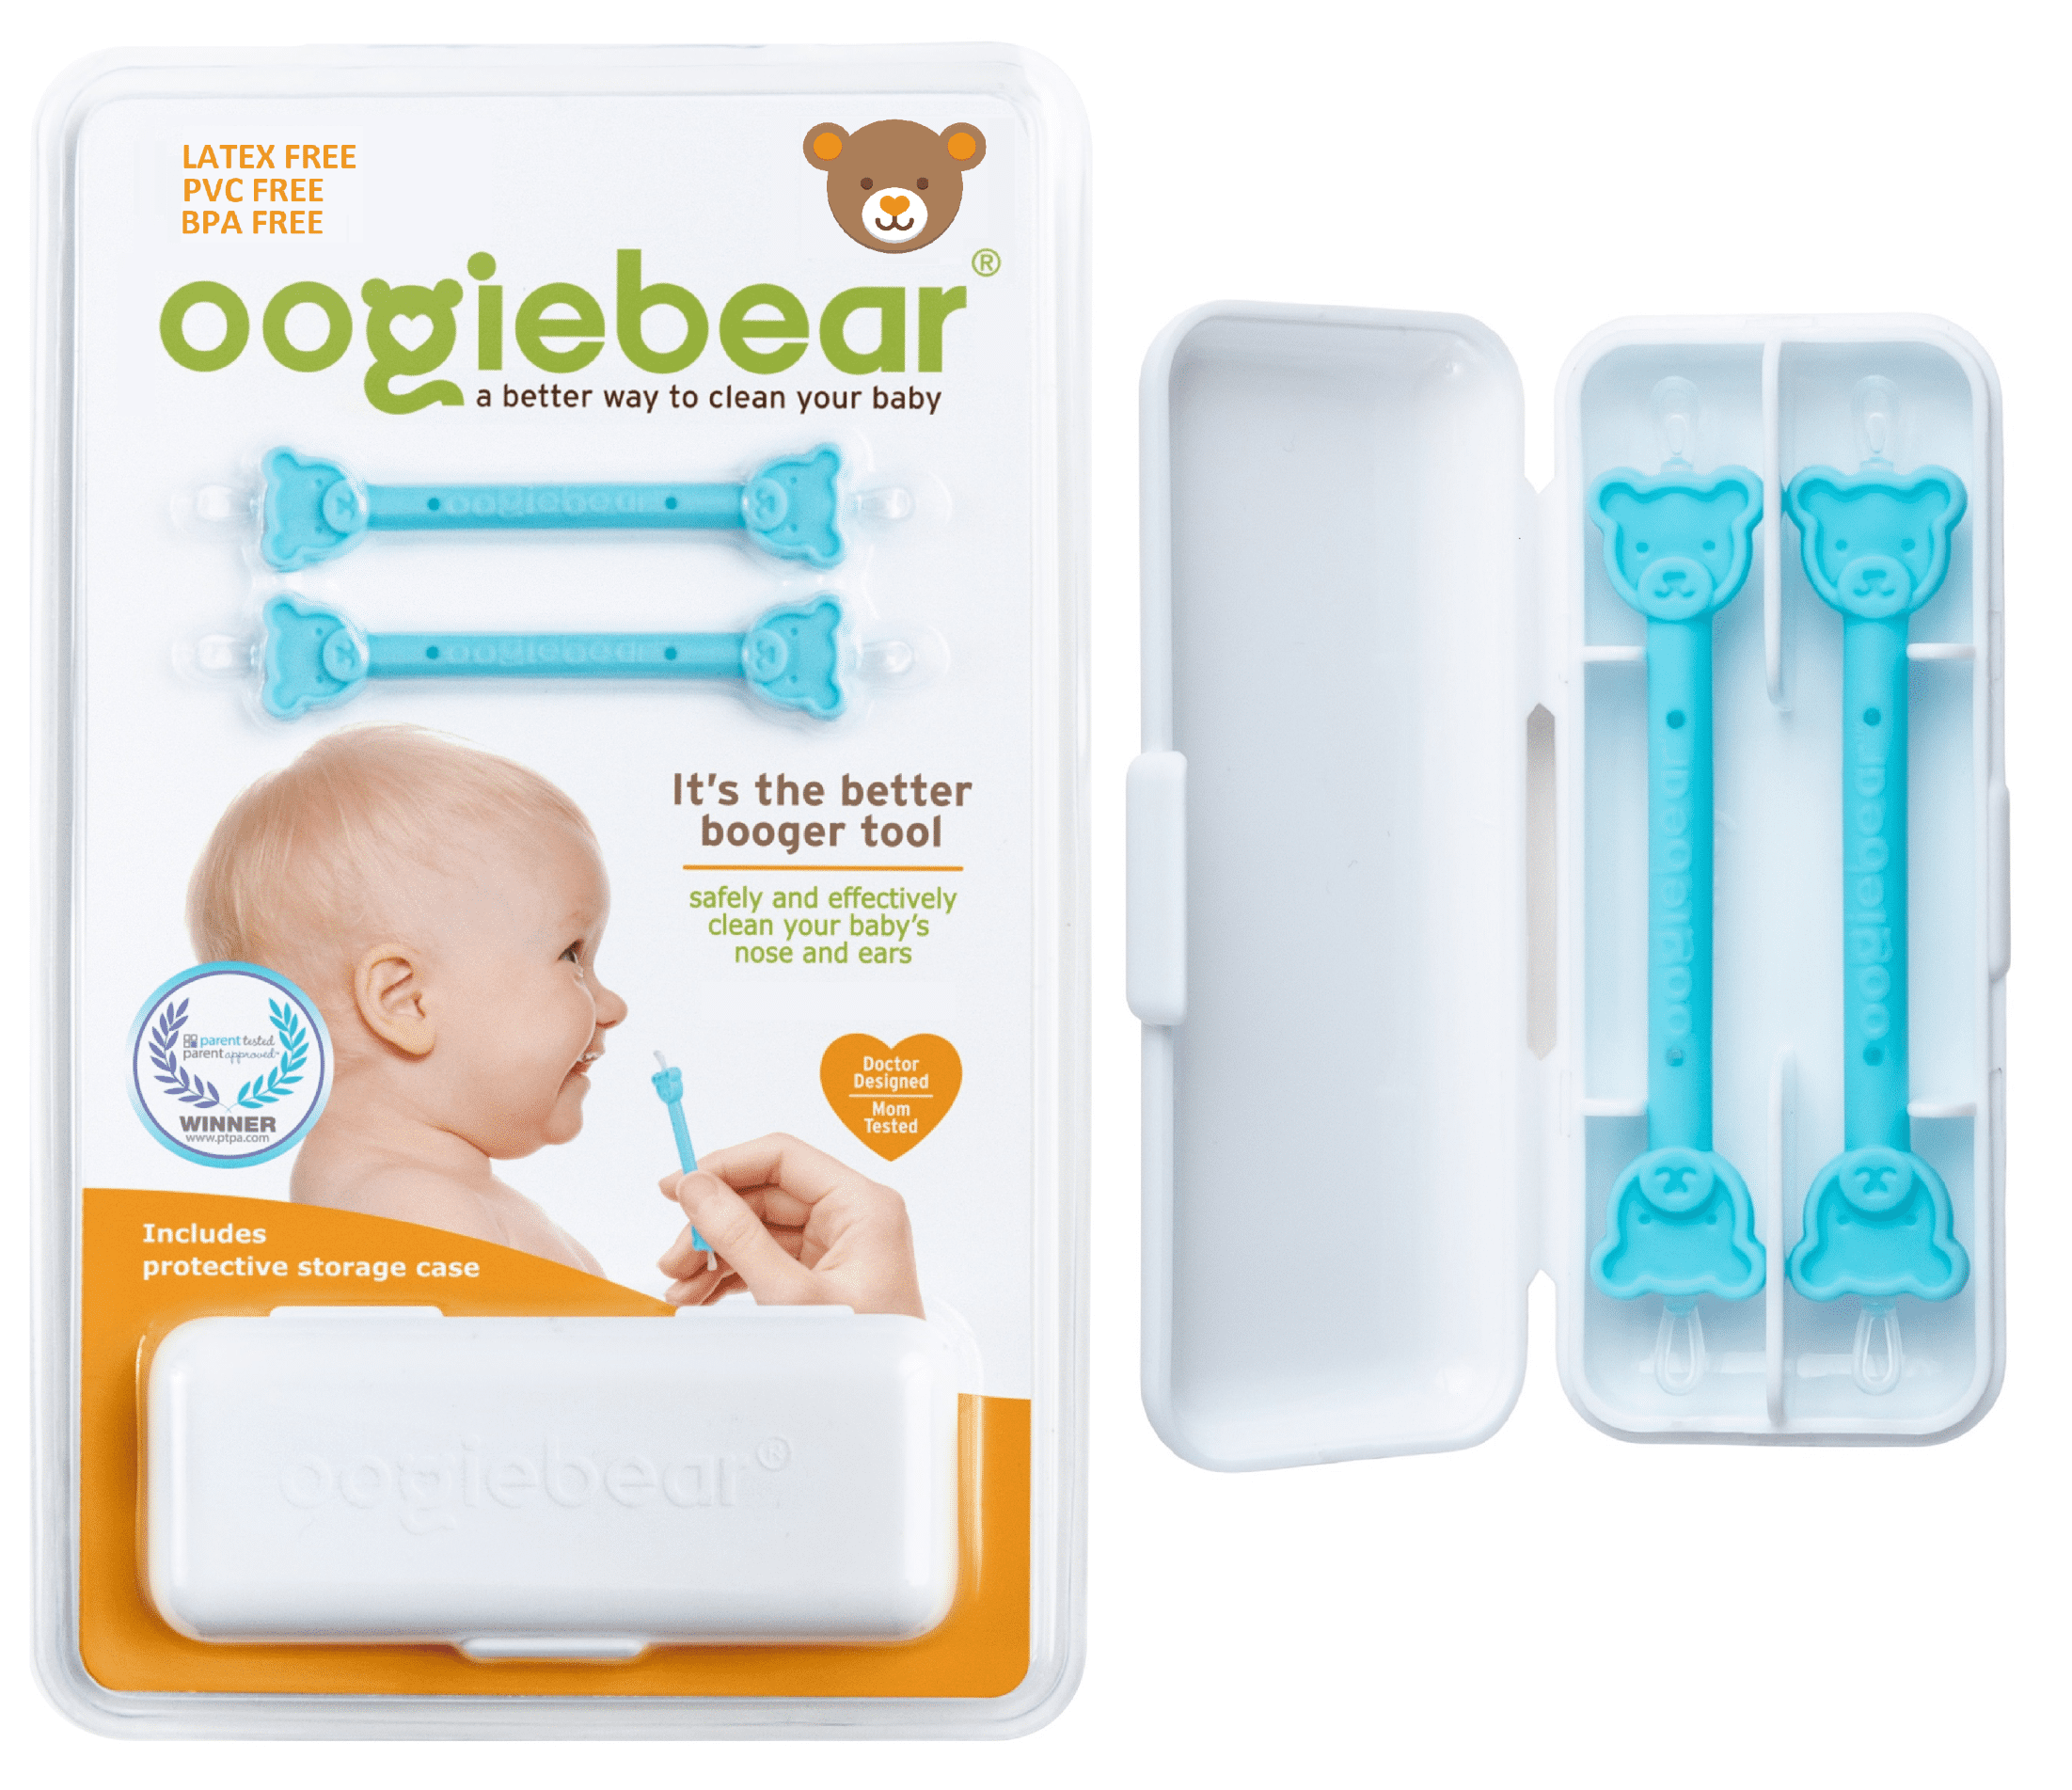 Booger Picker for Infants, Baby Nasal Booger and Earwax Remover for  Newborns and Toddlers, Safe & Easy to Use, Infant Booger Picker for Sticky  & Dried